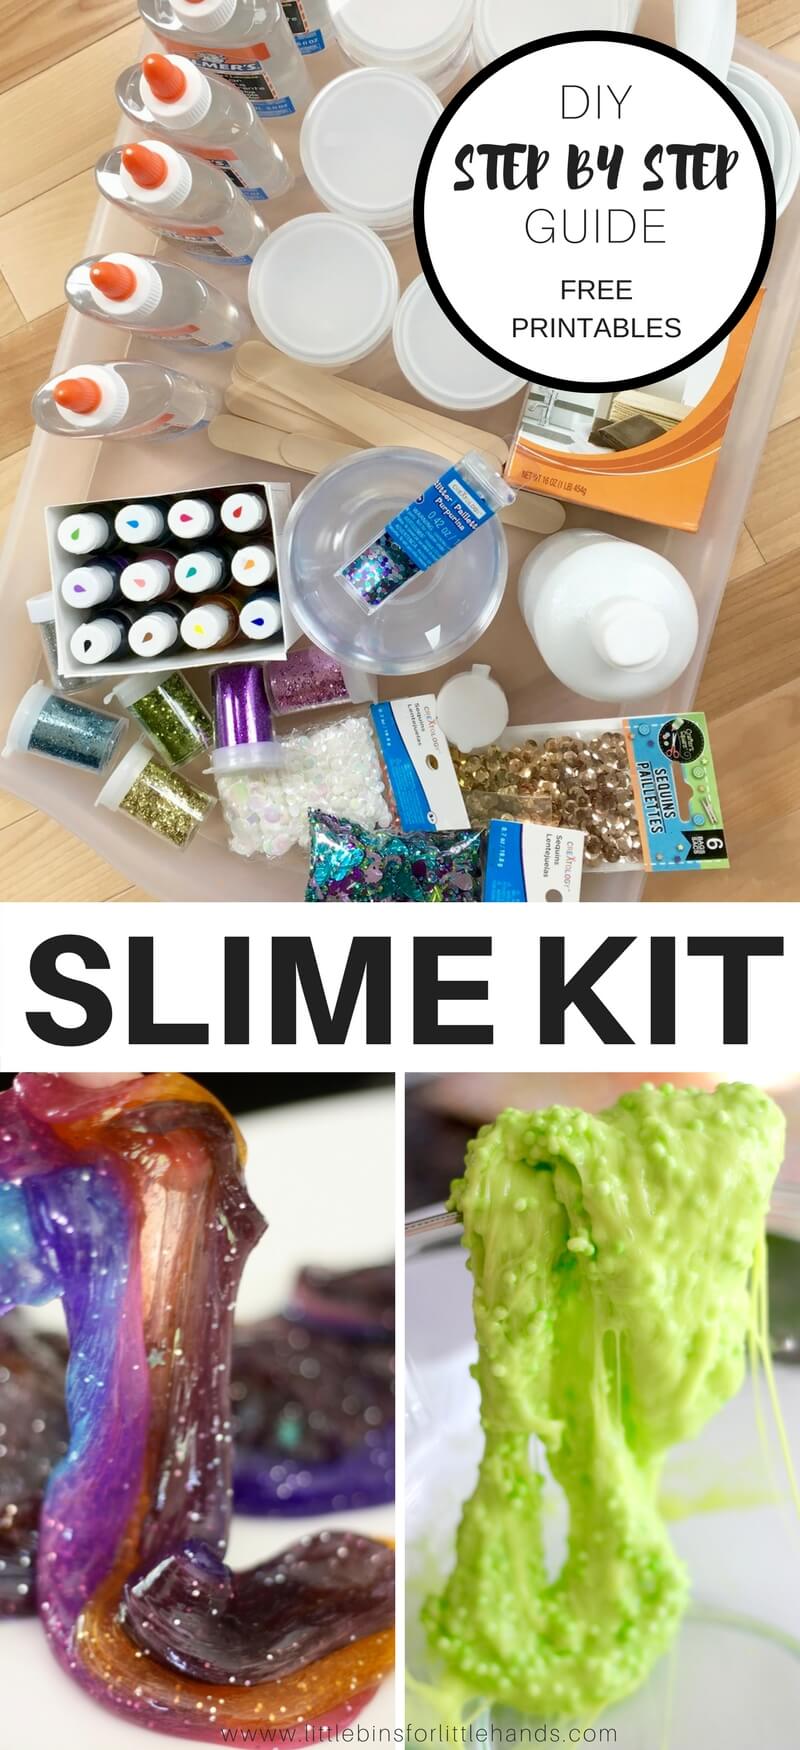 Kids go absolutely crazy for making slime today! Why bother with the dinky little kits in the store when you can put together an easy to make homemade slime kit they will use over and over again. We are going to show you step by step how to build the perfect slime kit to give your kids. Pair it with our printable slime recipe cheat sheet page and keep a slime kit handy for weekends, vacations, and stuck inside days! Homemade slime is an awesome project to share with the kids.